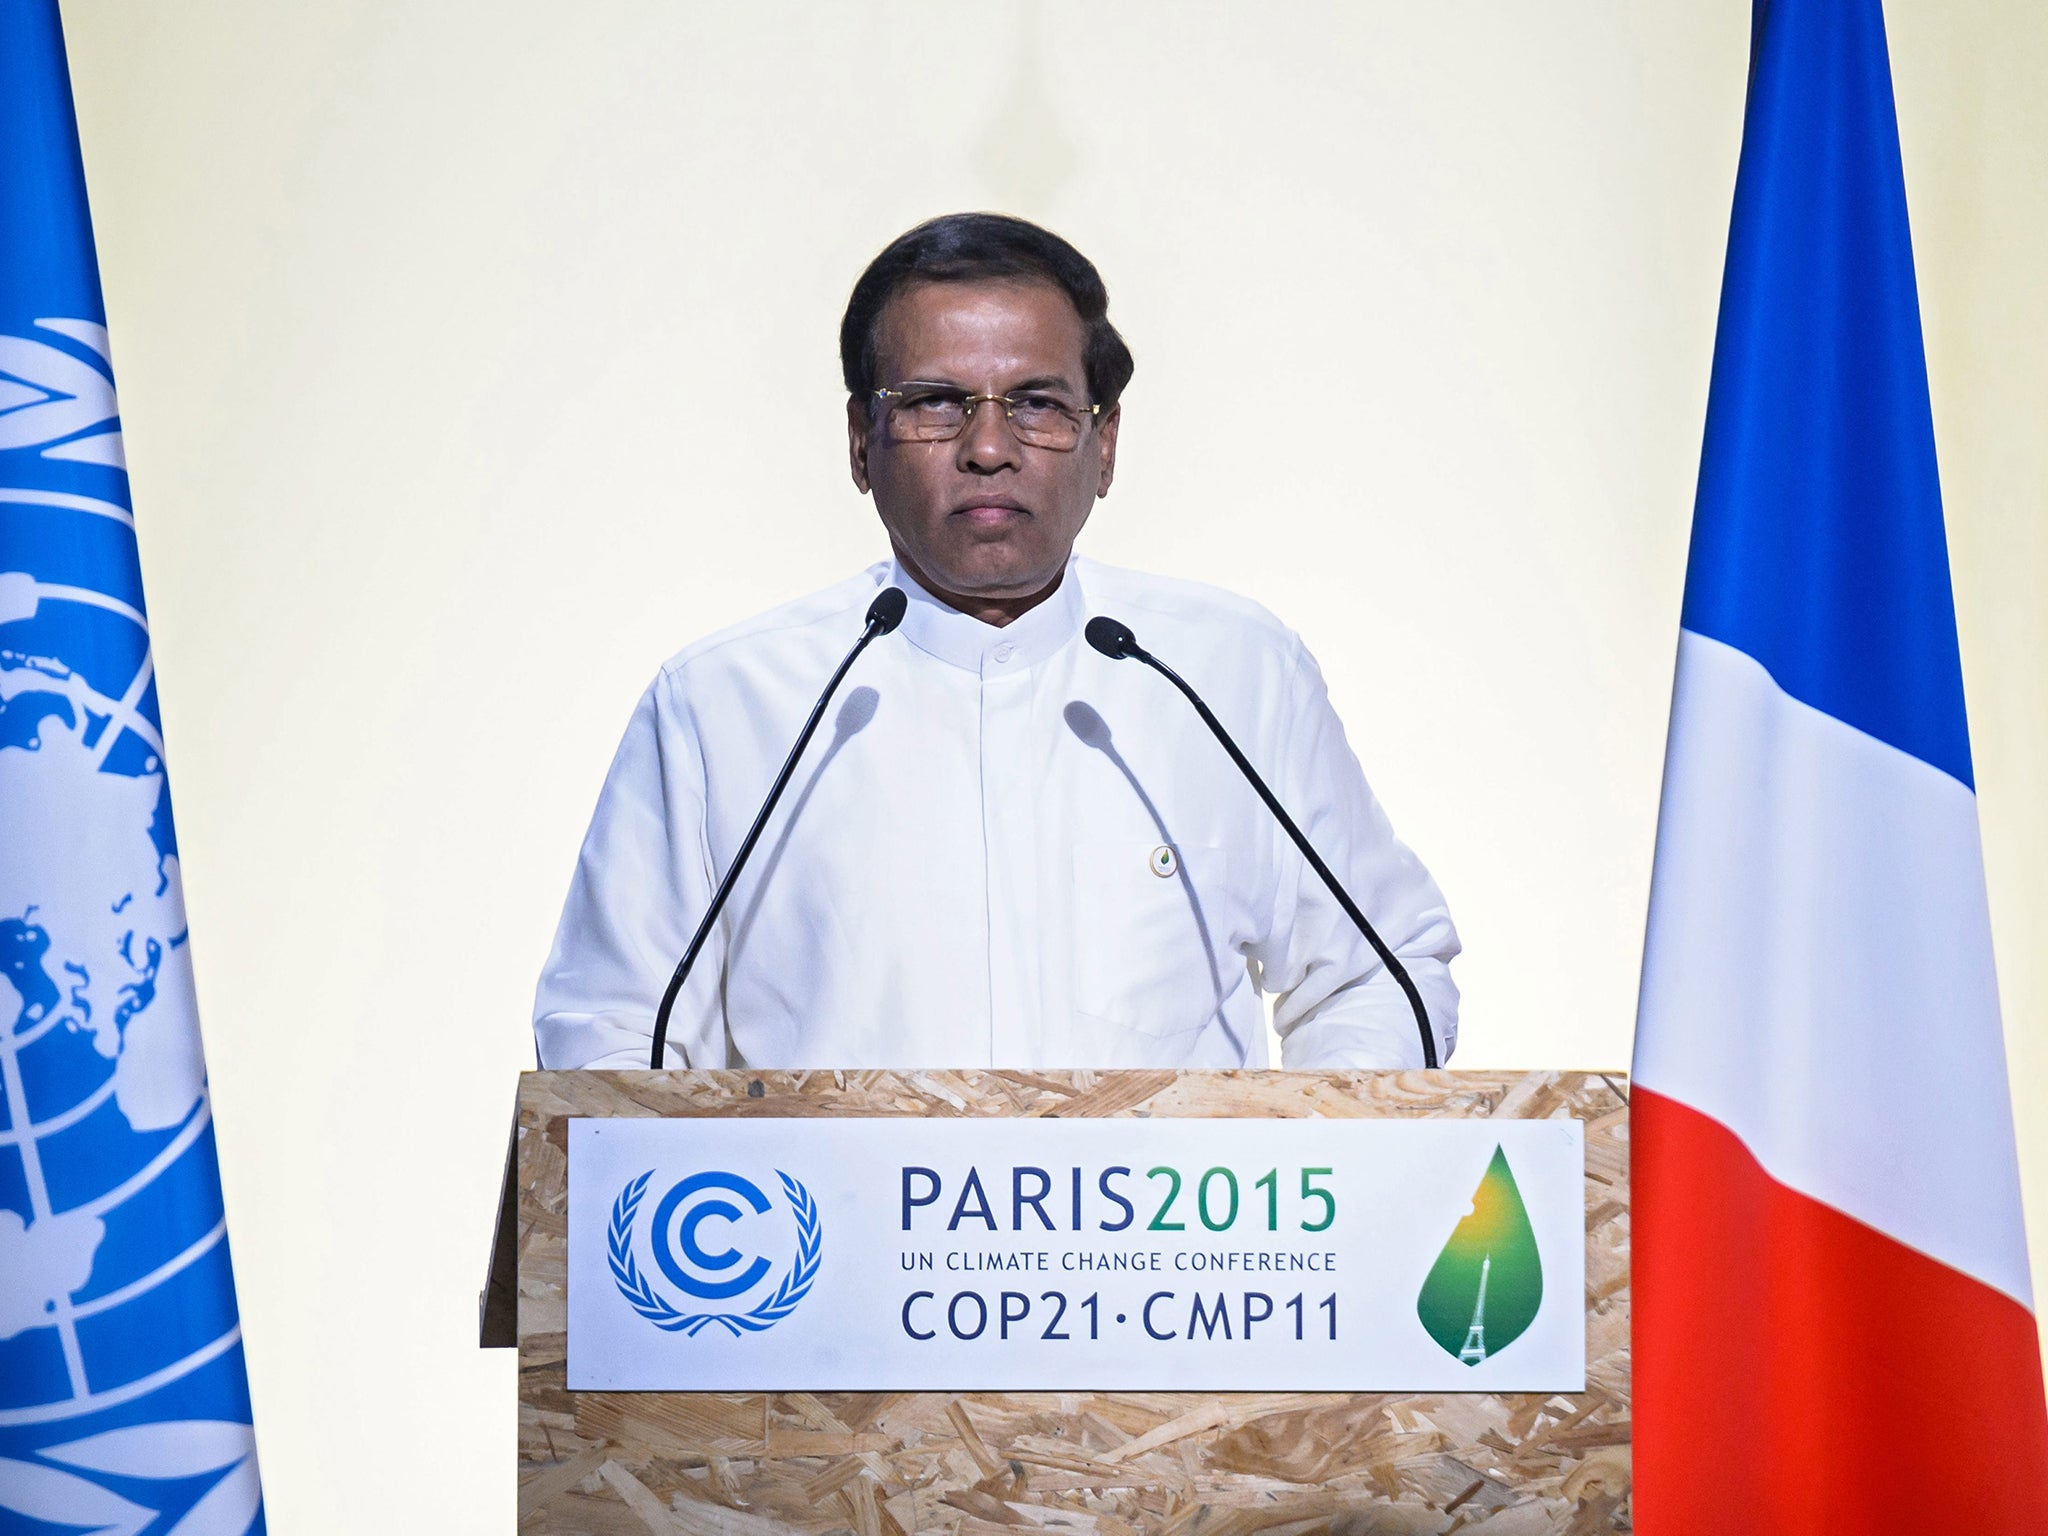 Sri Lanka Maithripala Sirisena delivers a speech as he attends Heads of States' Statements ceremony of the COP21 World Climate Change Conference 2015